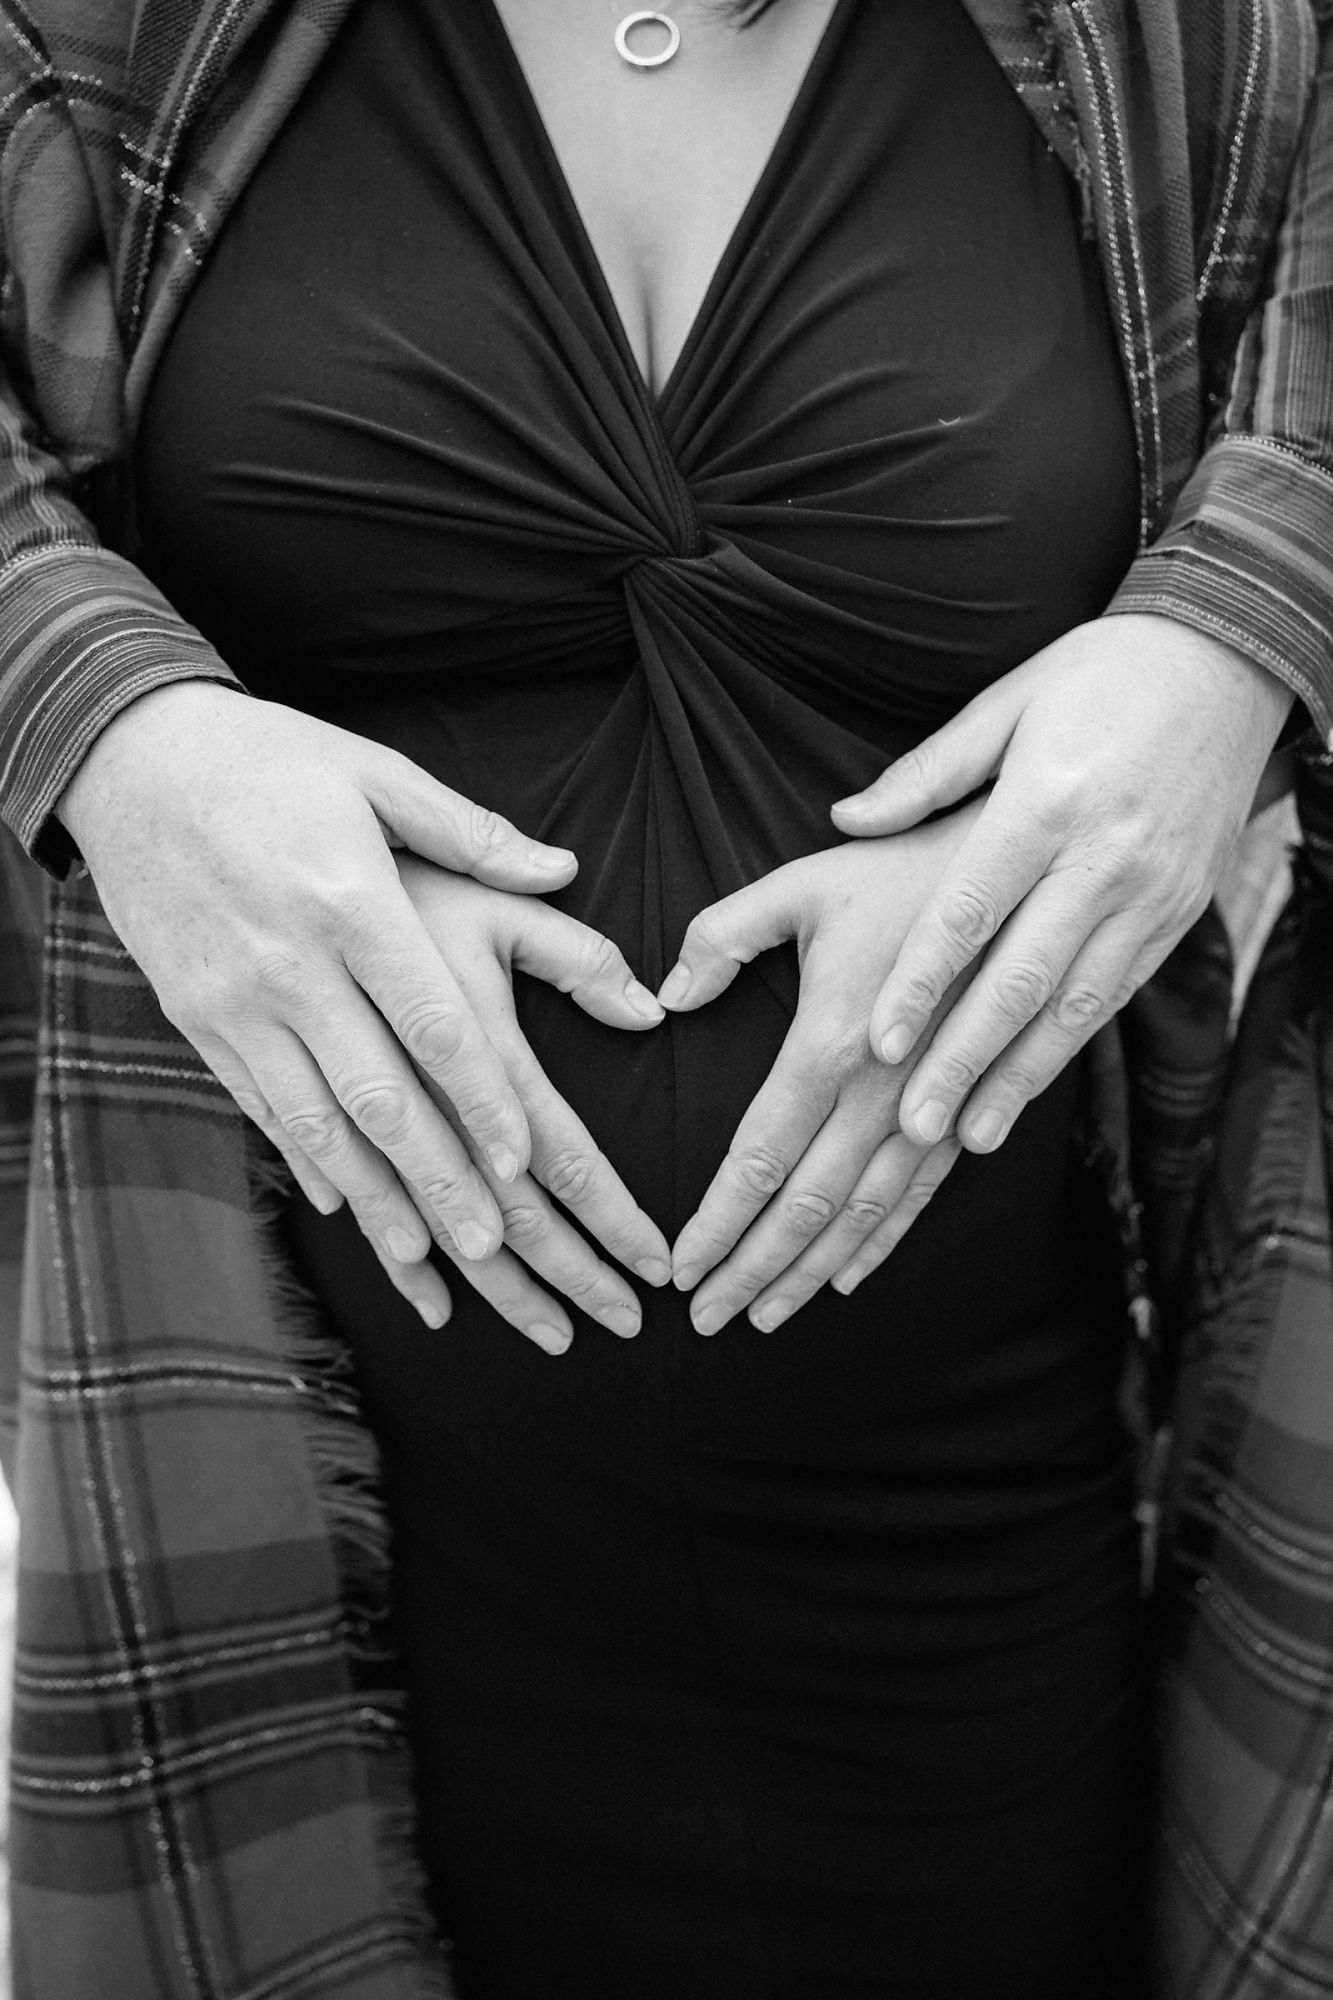 Andy & Erin make a heart shape with their hands during their maternity photoshoot with Jennifer Blaak Photography.